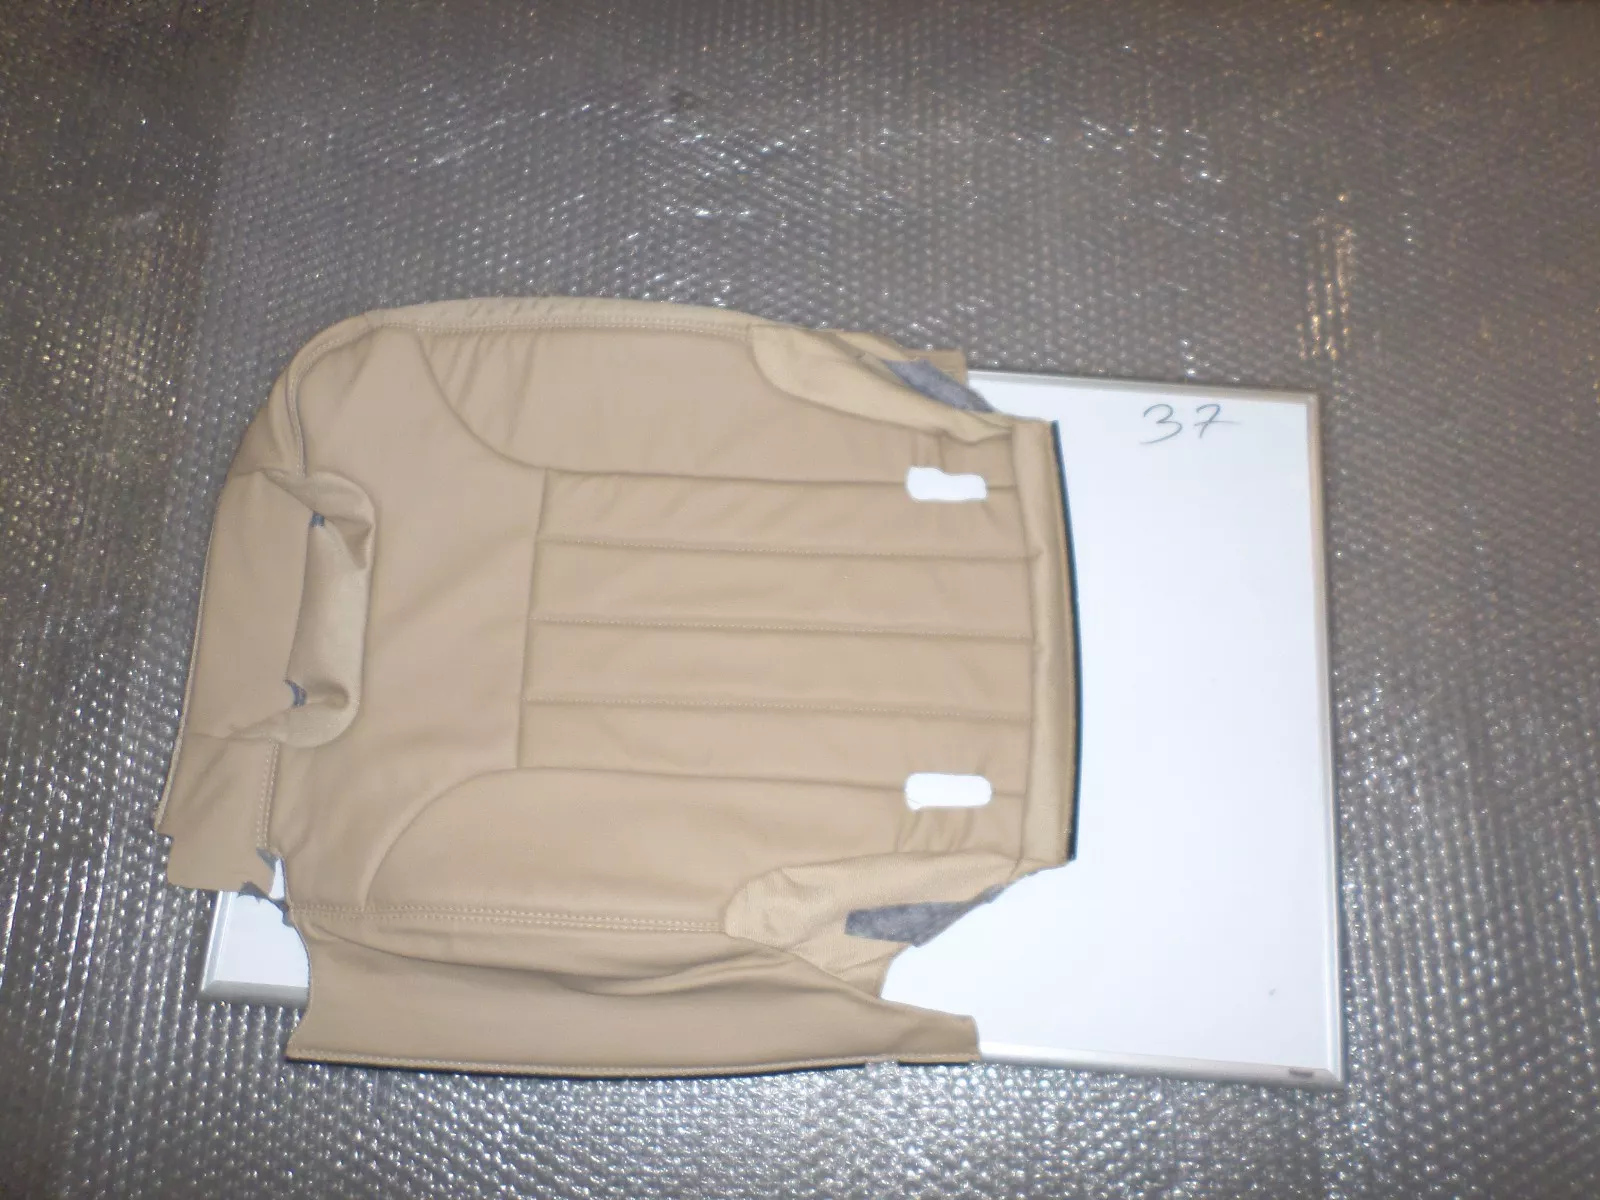 New OEM Mercedes 3rd Row LH Seat Cover 2006-2013 R-Class 251-930-08-87-8K55 - £77.87 GBP